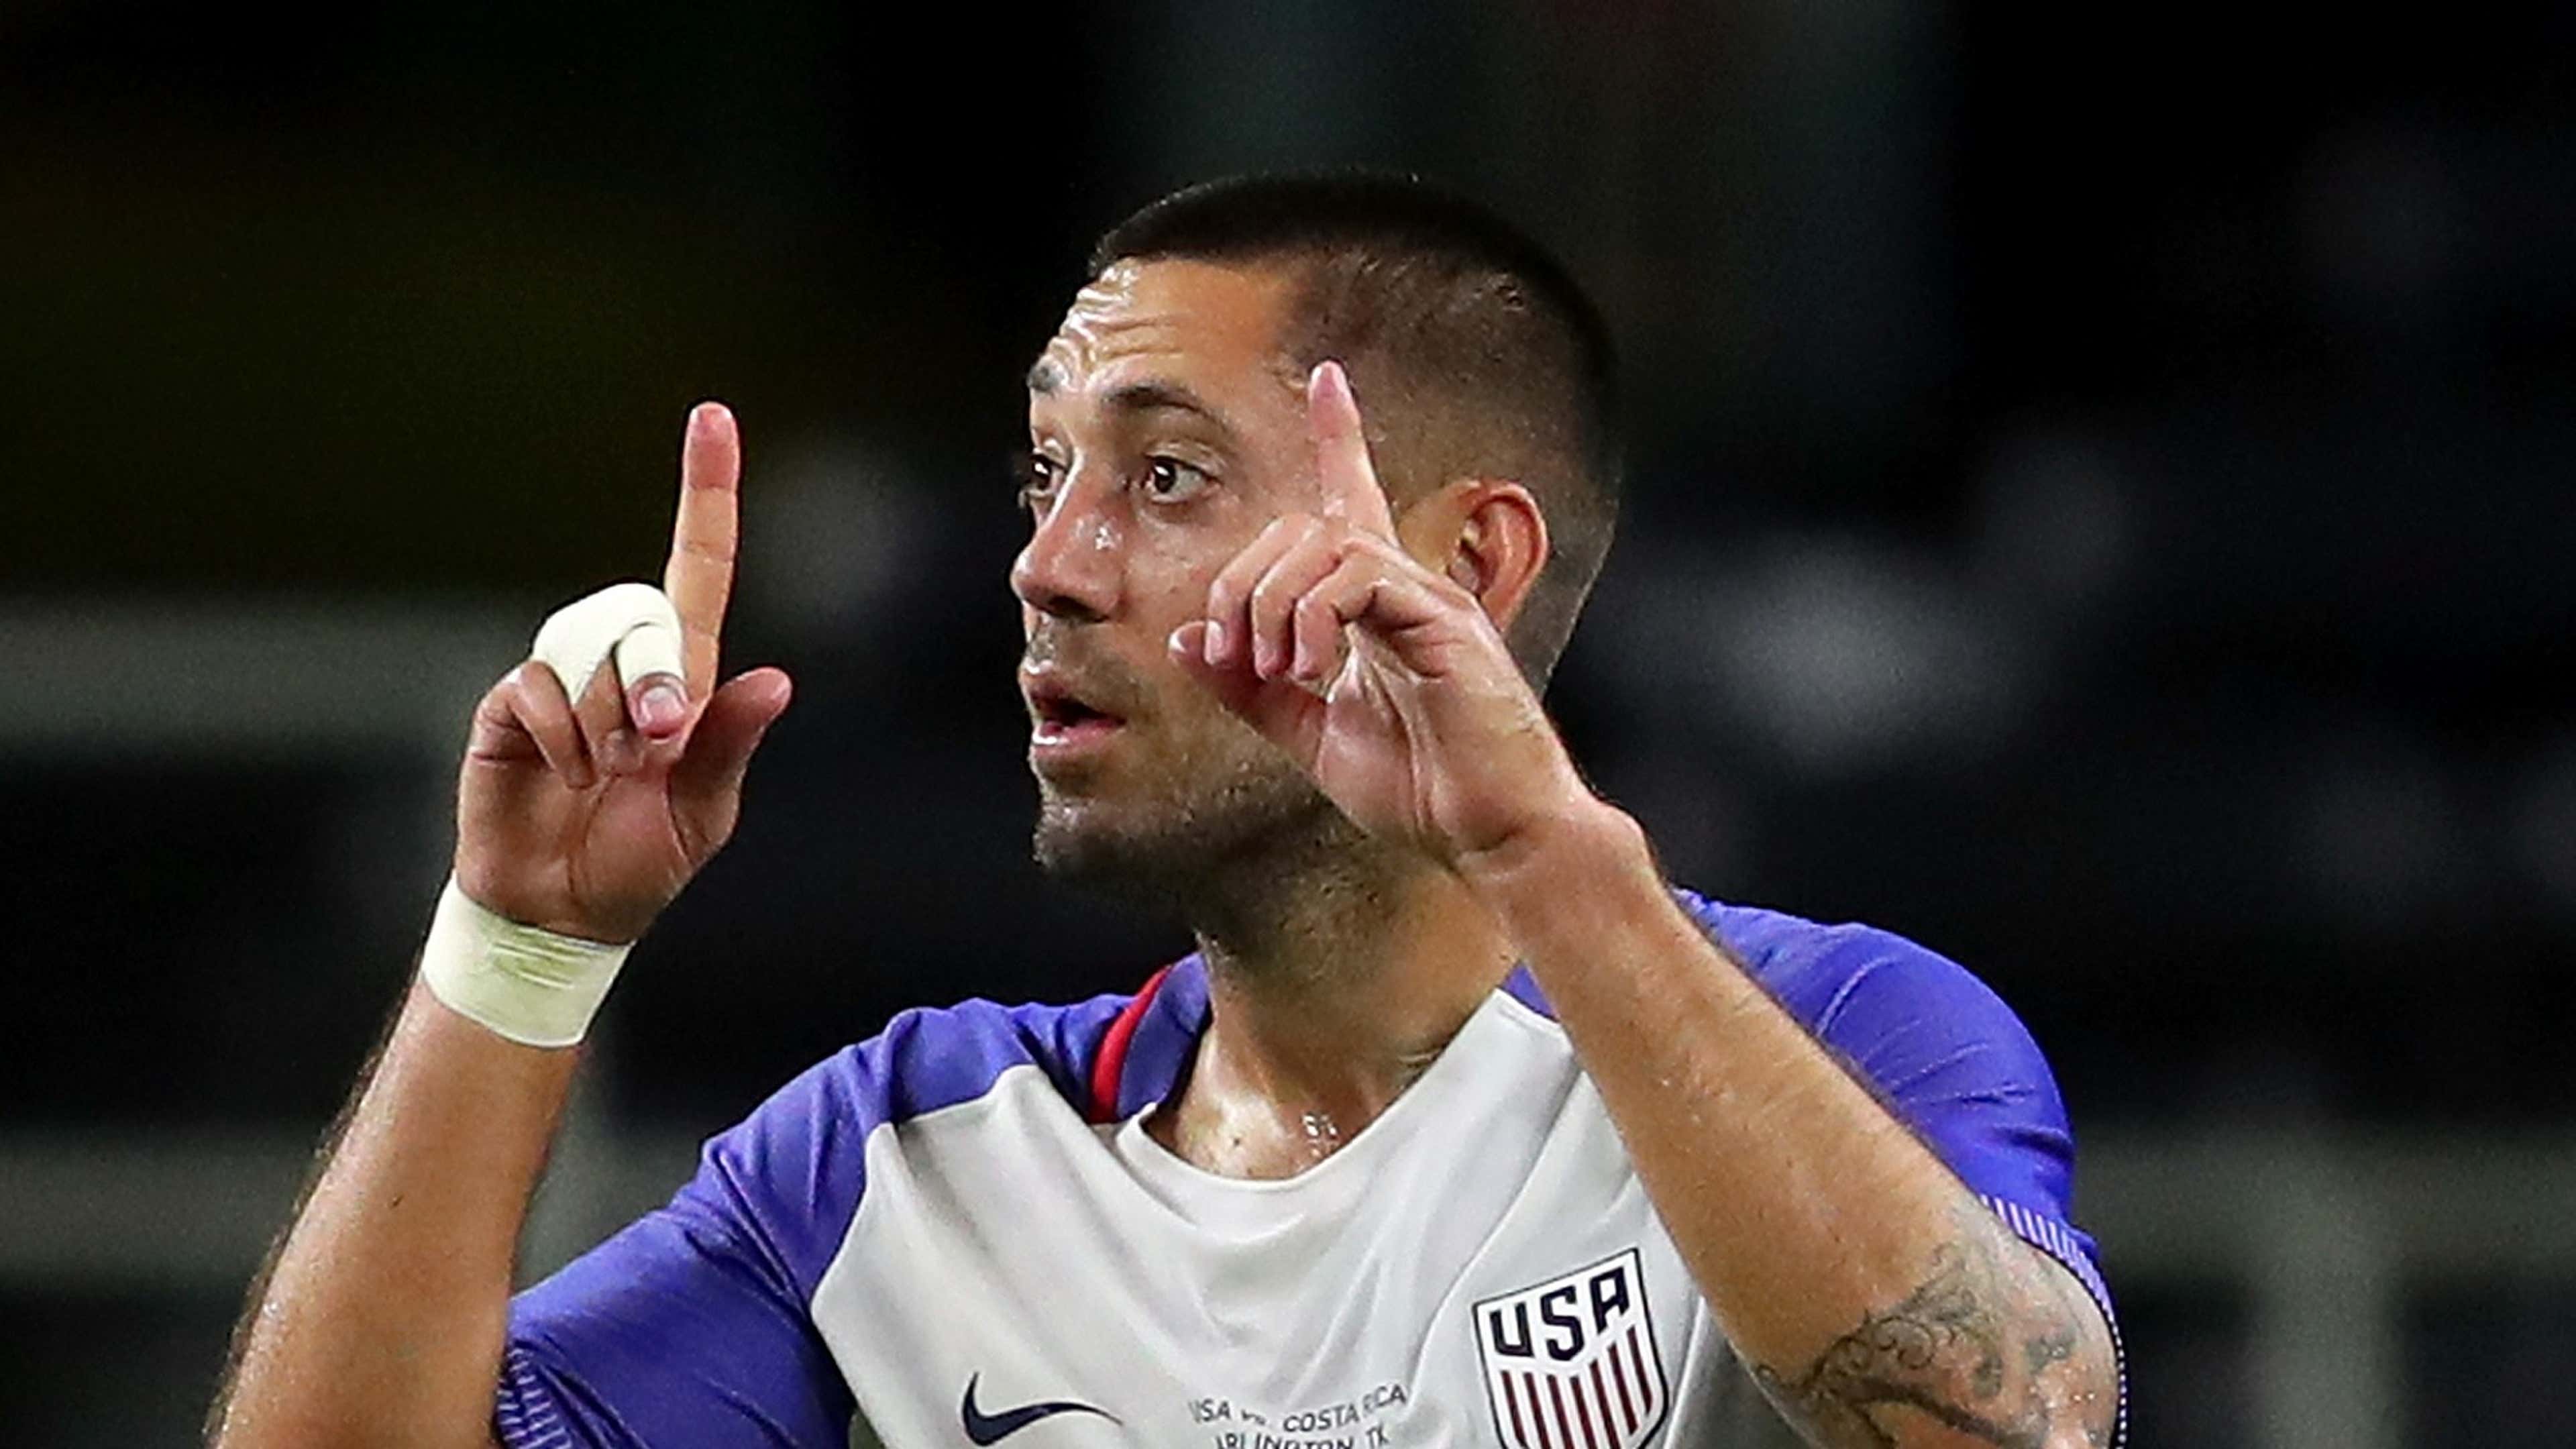 Clint Dempsey retires: American soccer legend steps away from the game